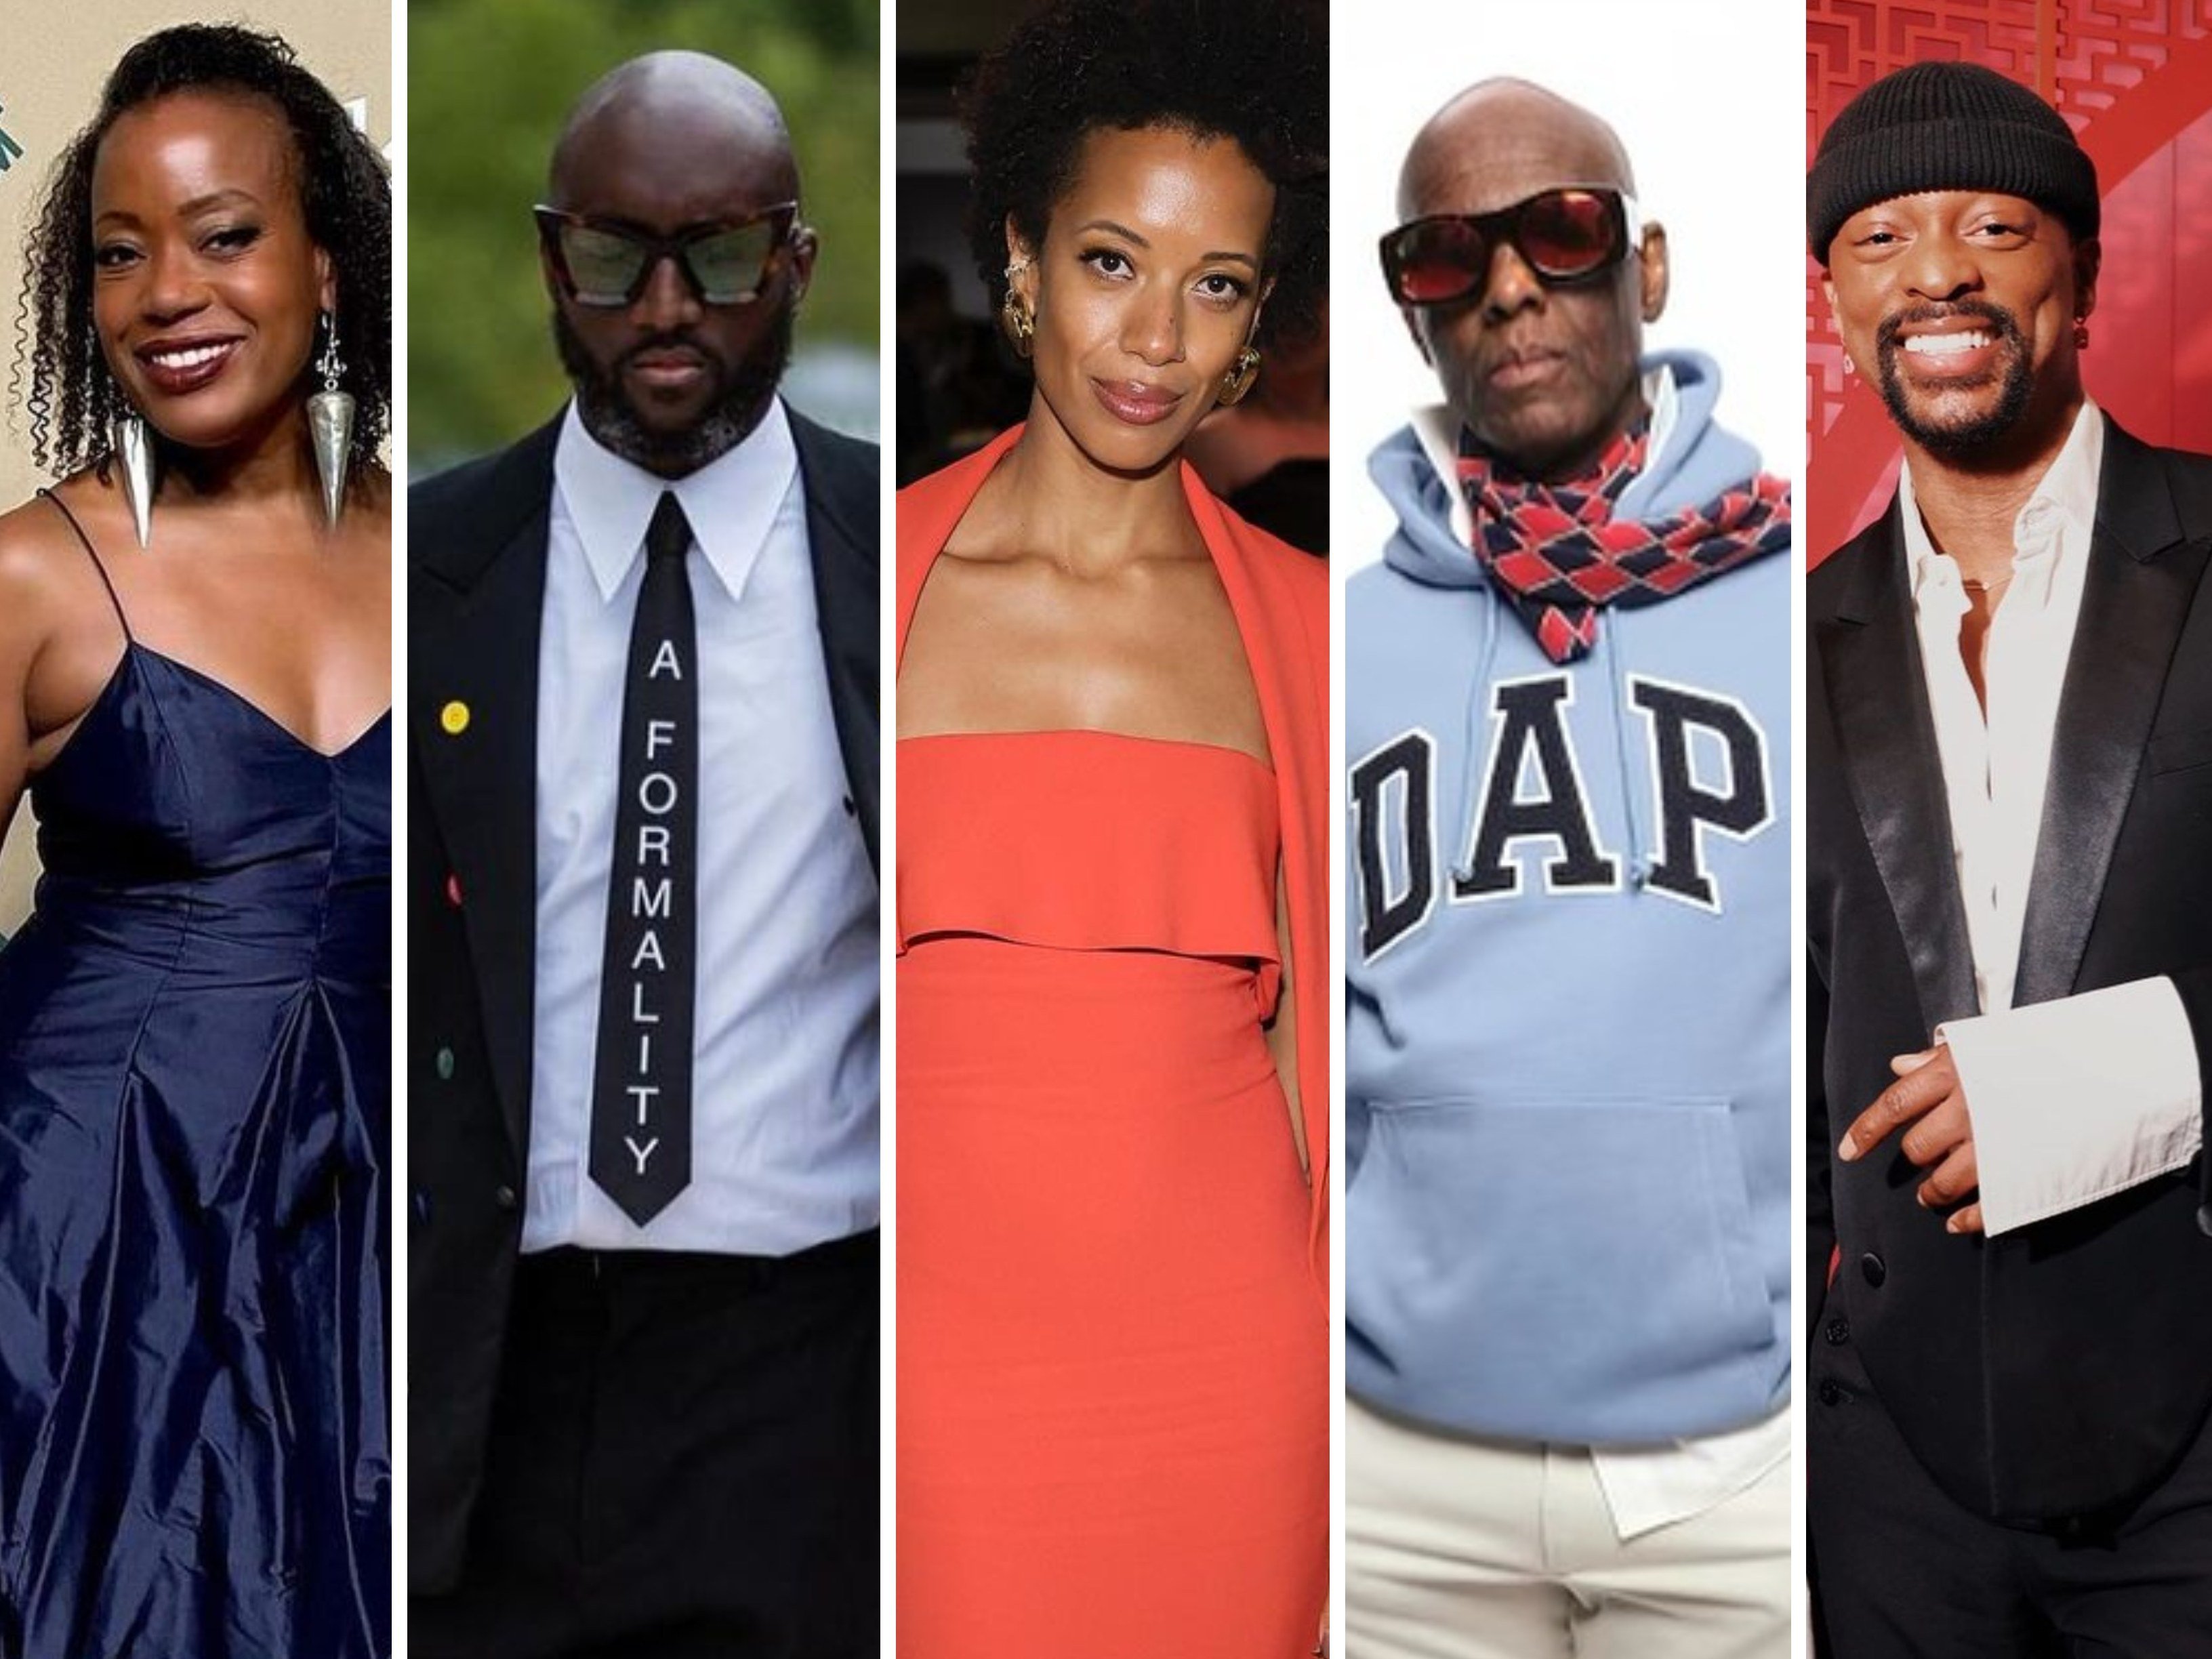 Tracy Reese, Virgil Abloh, Carly Cushnie, Dapper Dan and LaQuan Smith are all prominent black fashion designers. Photos: @tracy_reese, @virgilabloh, @carlycushnie, @daperdanharlem, @laquan_smith/Instagram